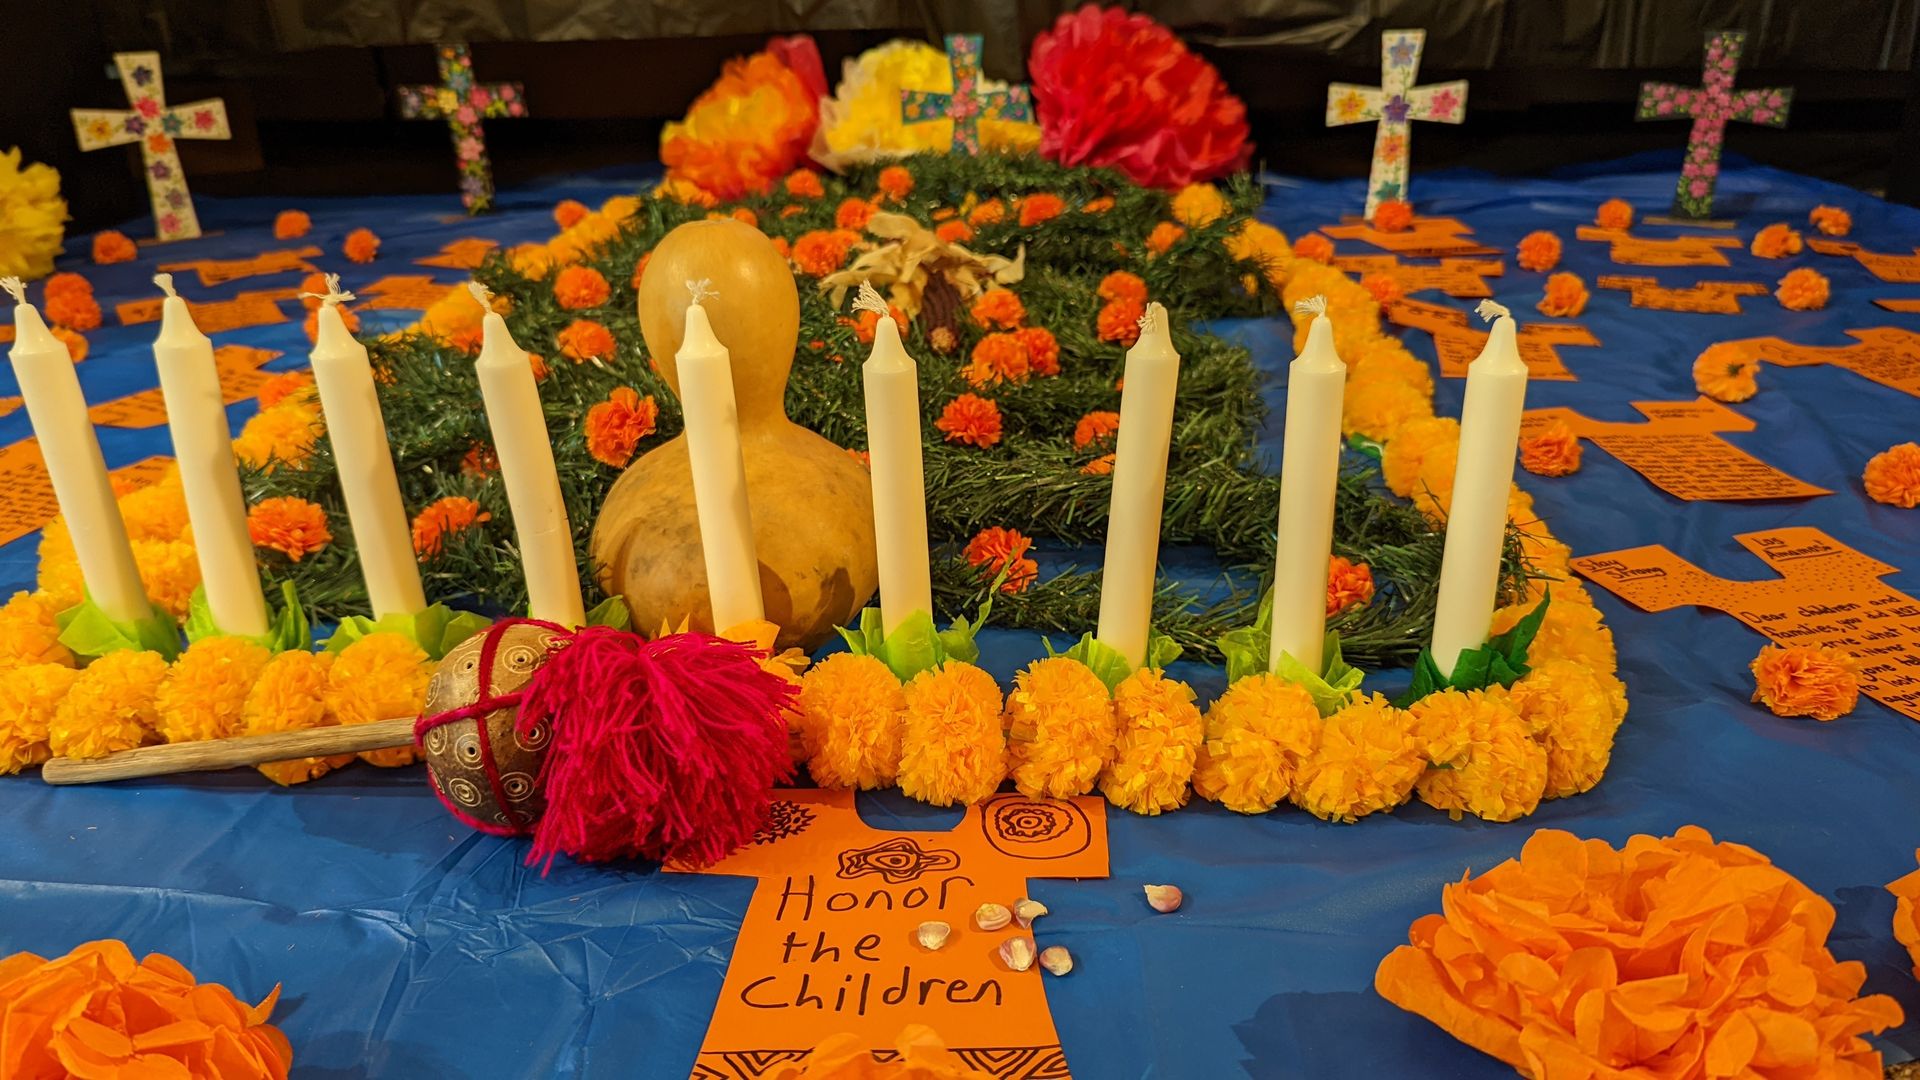 A paper shaped like a t-shirt says "Honor the children" in front of candles and a paper grave covered with paper flowers, with crosses in the background.